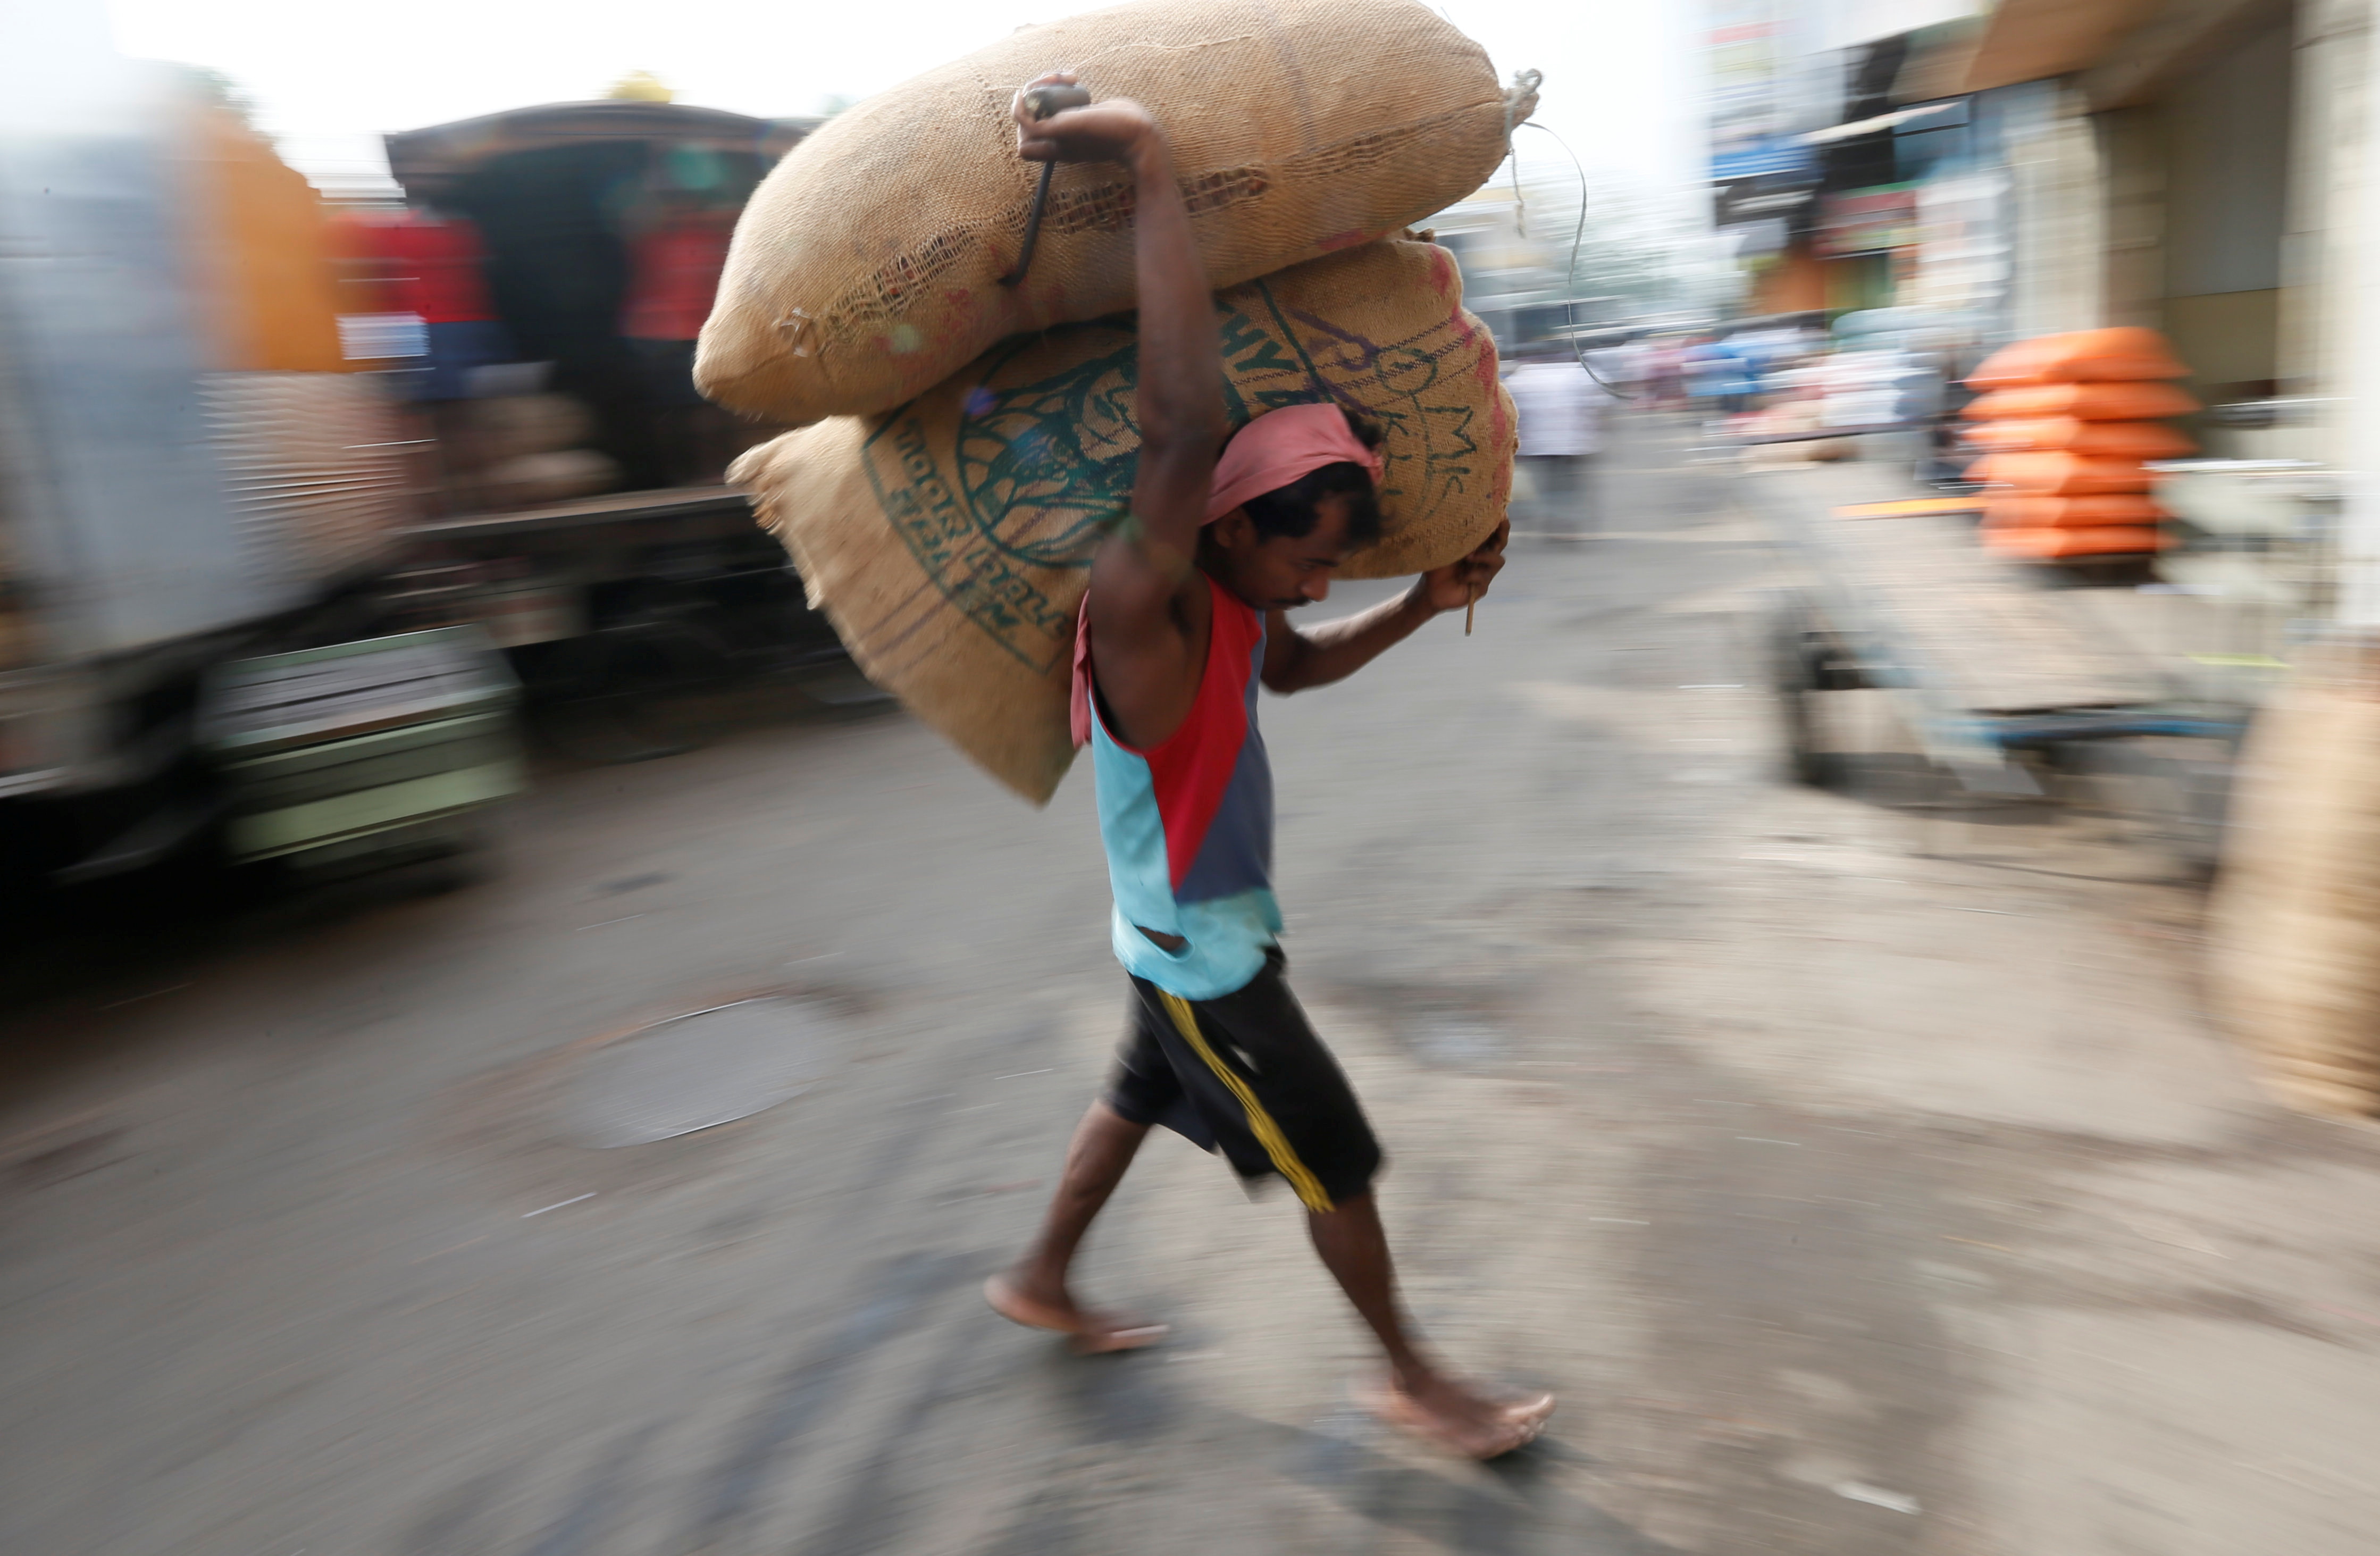 A worker carries a sack of rice at main market in Colombo January 29, 2016.  REUTERS/Dinuka Liyanawatte/File Photo